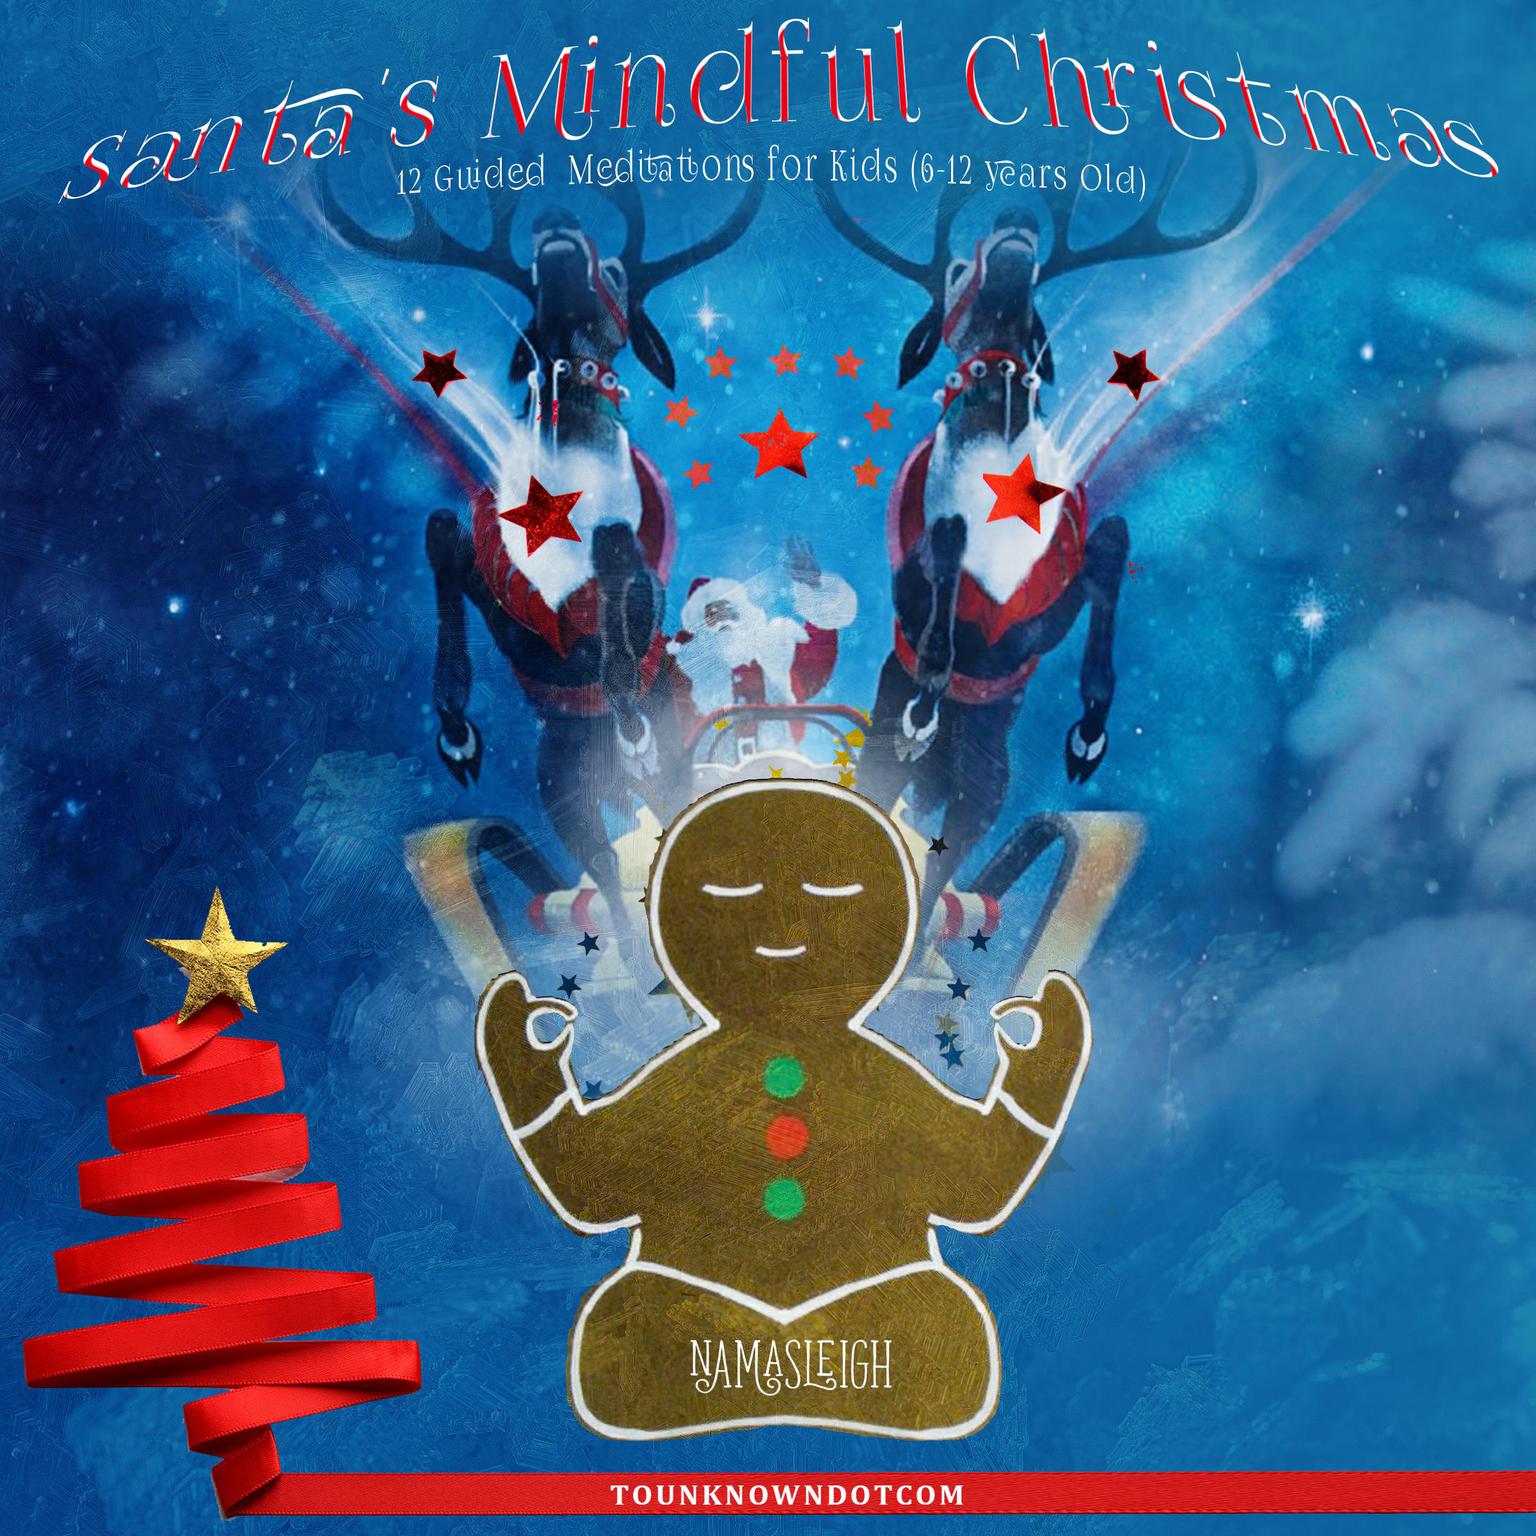 Santas Mindful Christmas: 12 Guided Meditations for Kids (6-12 Years Old) Audiobook, by tounknowndotcom 